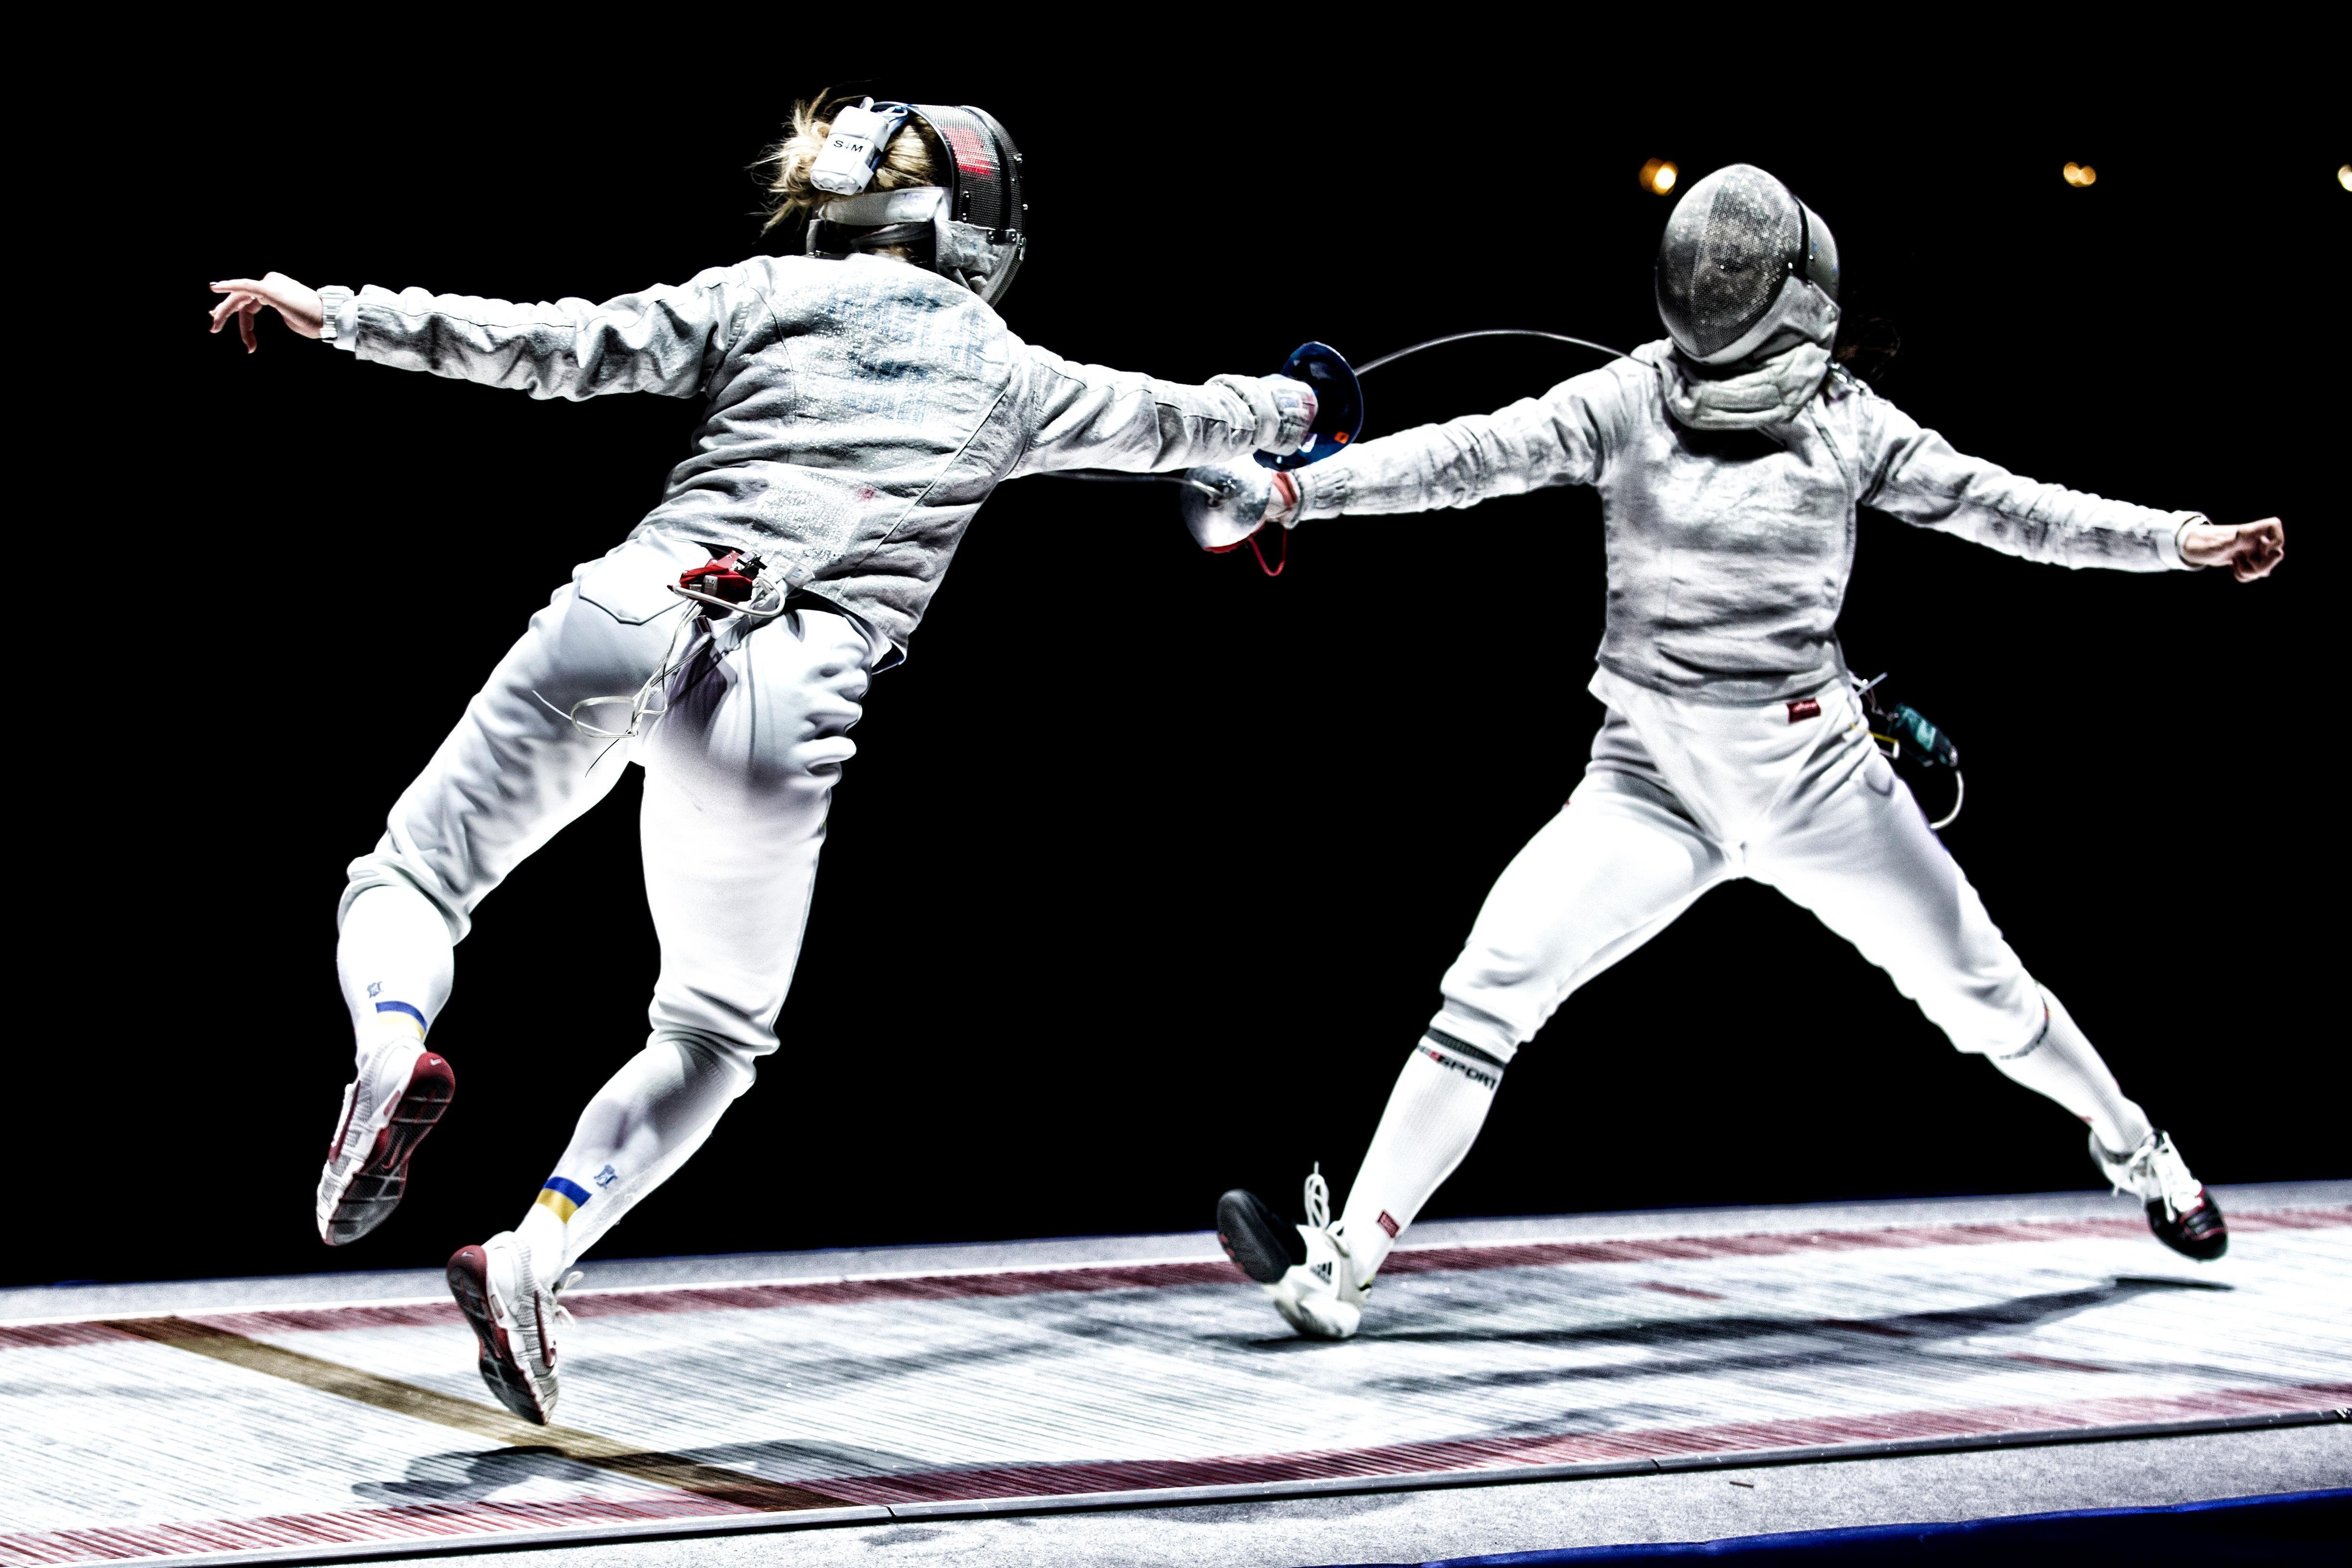 fencing HD wallpaper, background